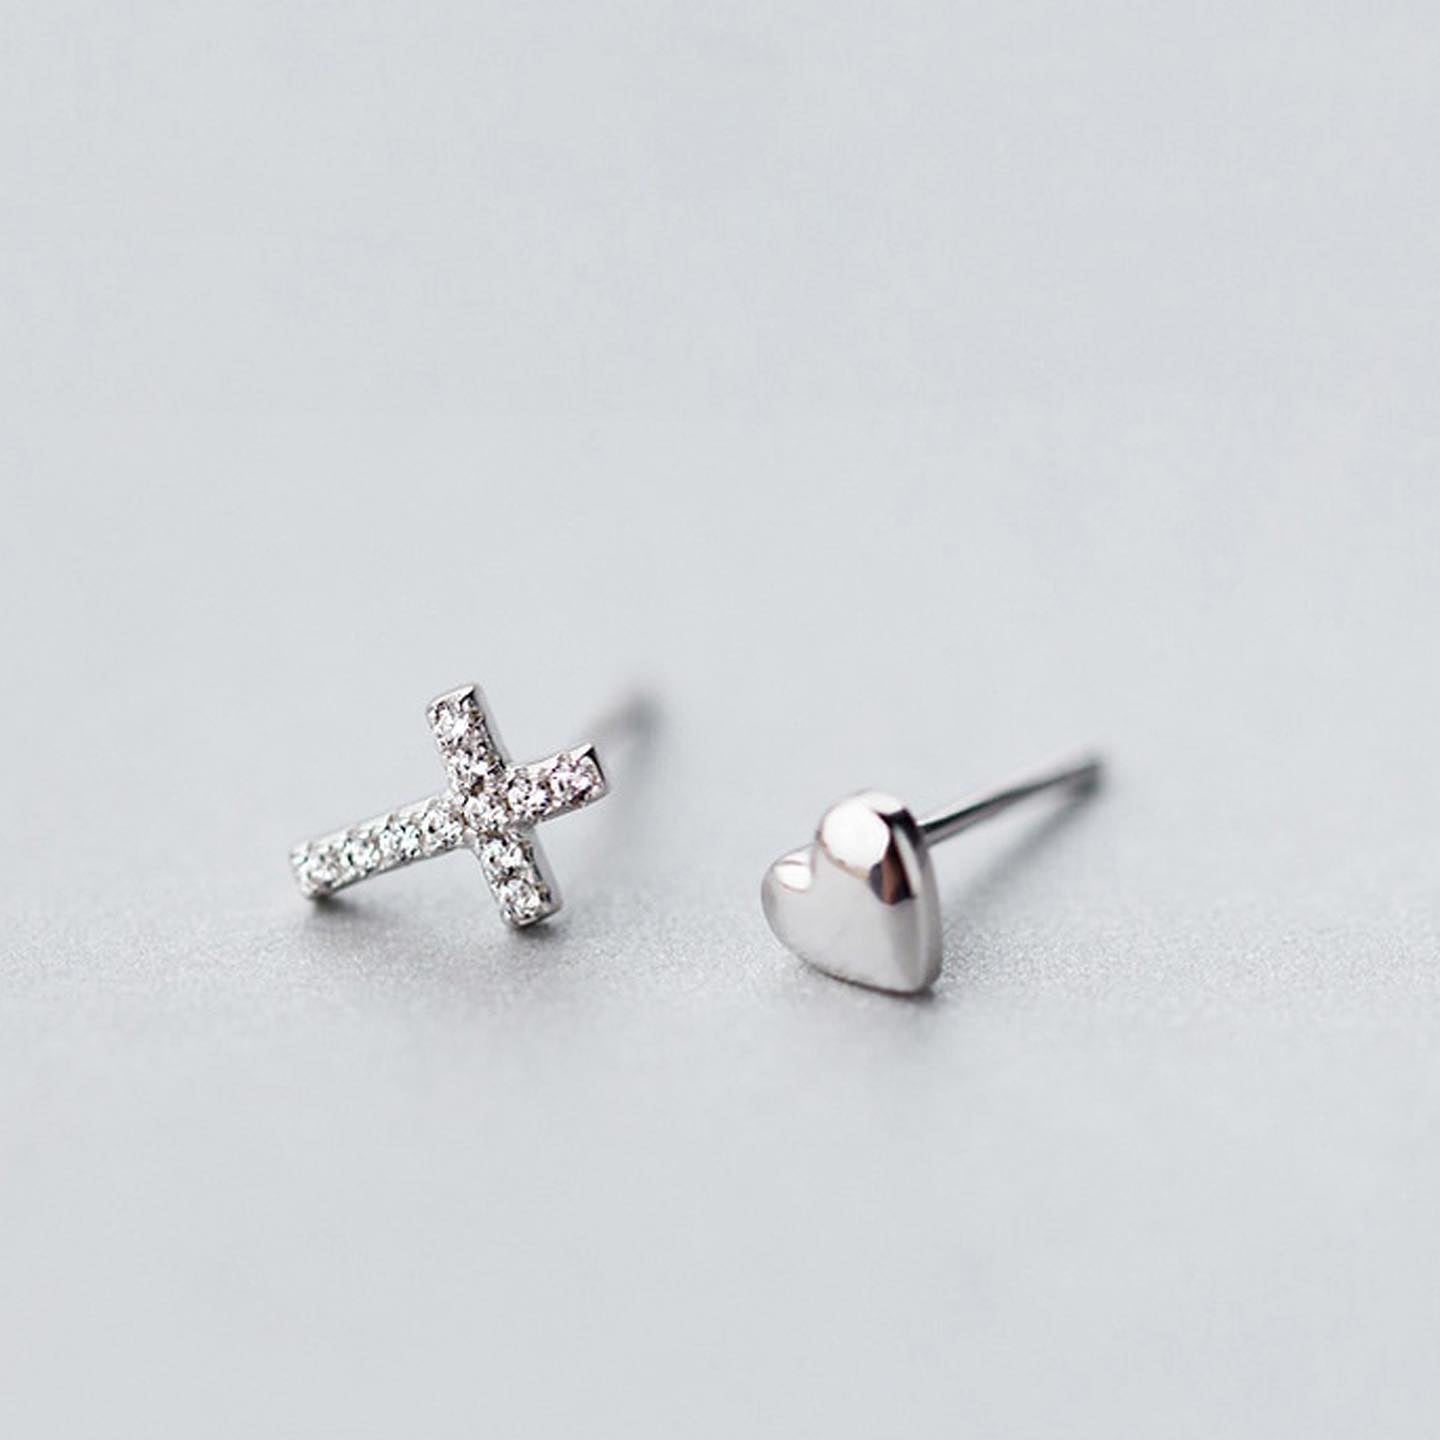 Stainless Silver vs. Sterling Silver: What's the difference?